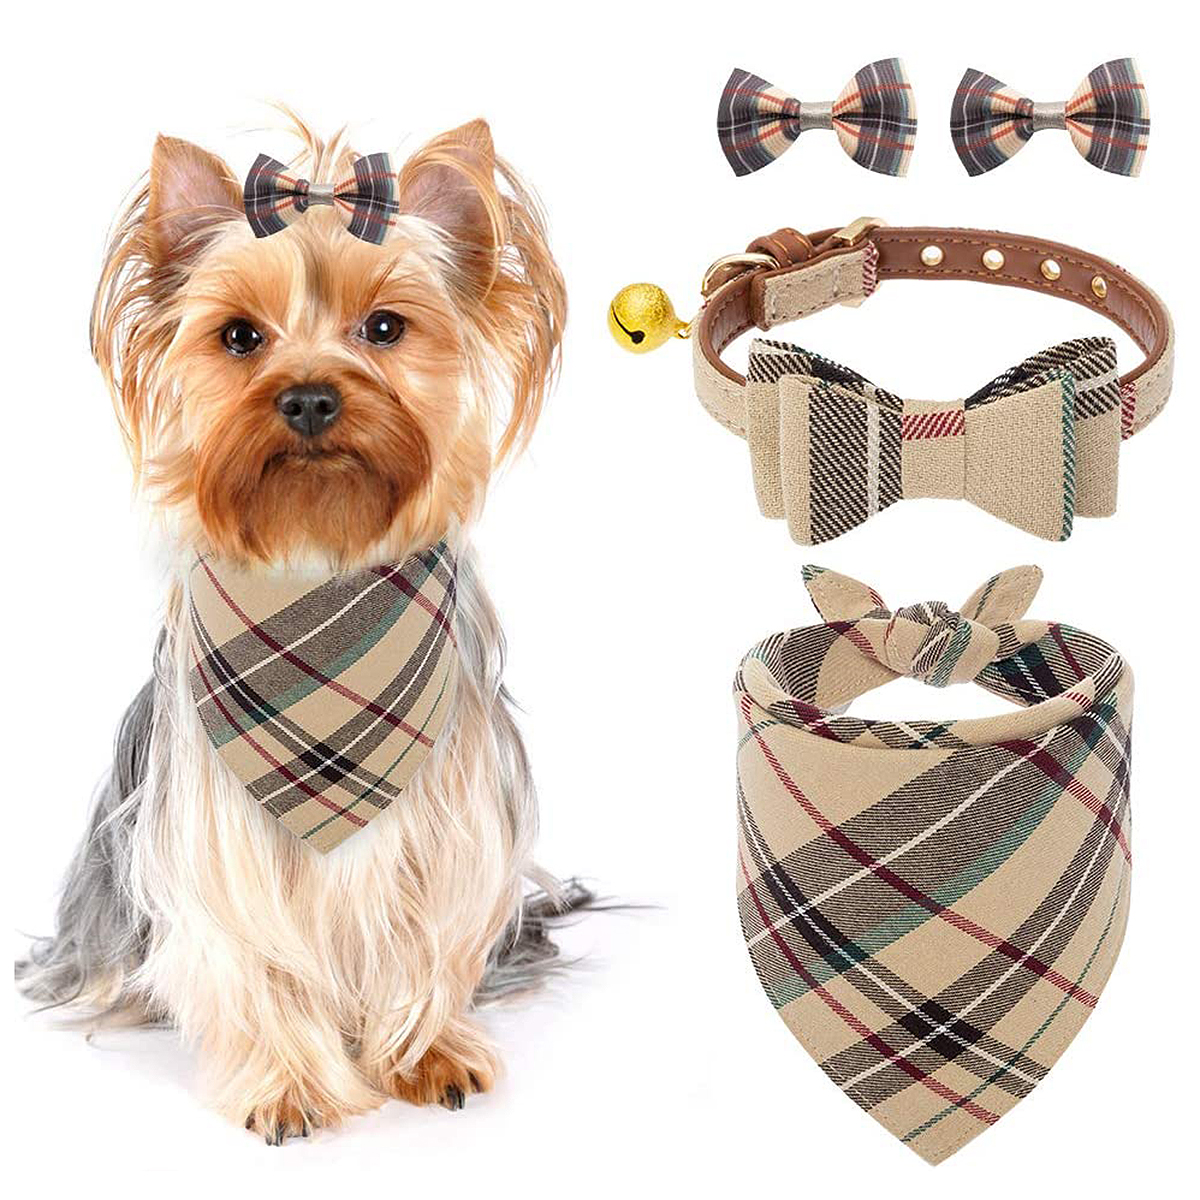 The 12 Best Gifts for Pet Lovers This 2022 Holiday Season